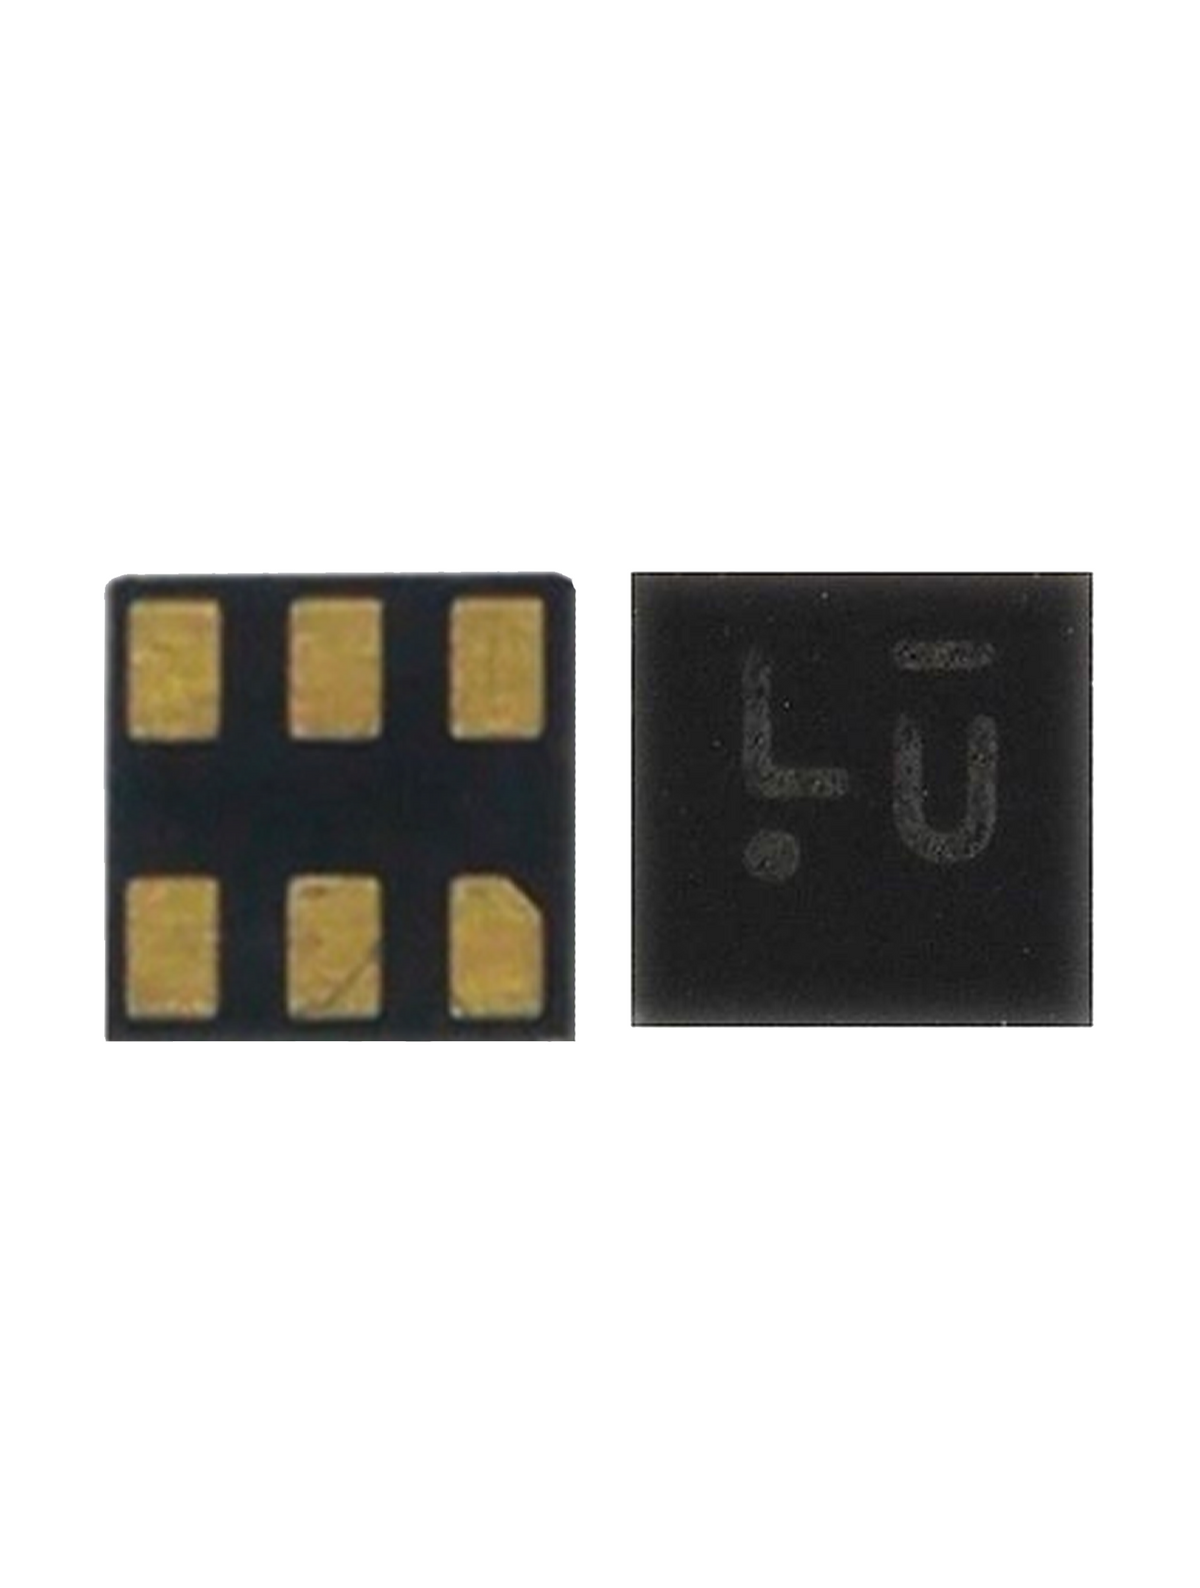 MULTIPLEXER SWITCH IC COMPATIBLE WITH IPHONE 7 / 7 PLUS (SWPMX_RF: 6 PINS)